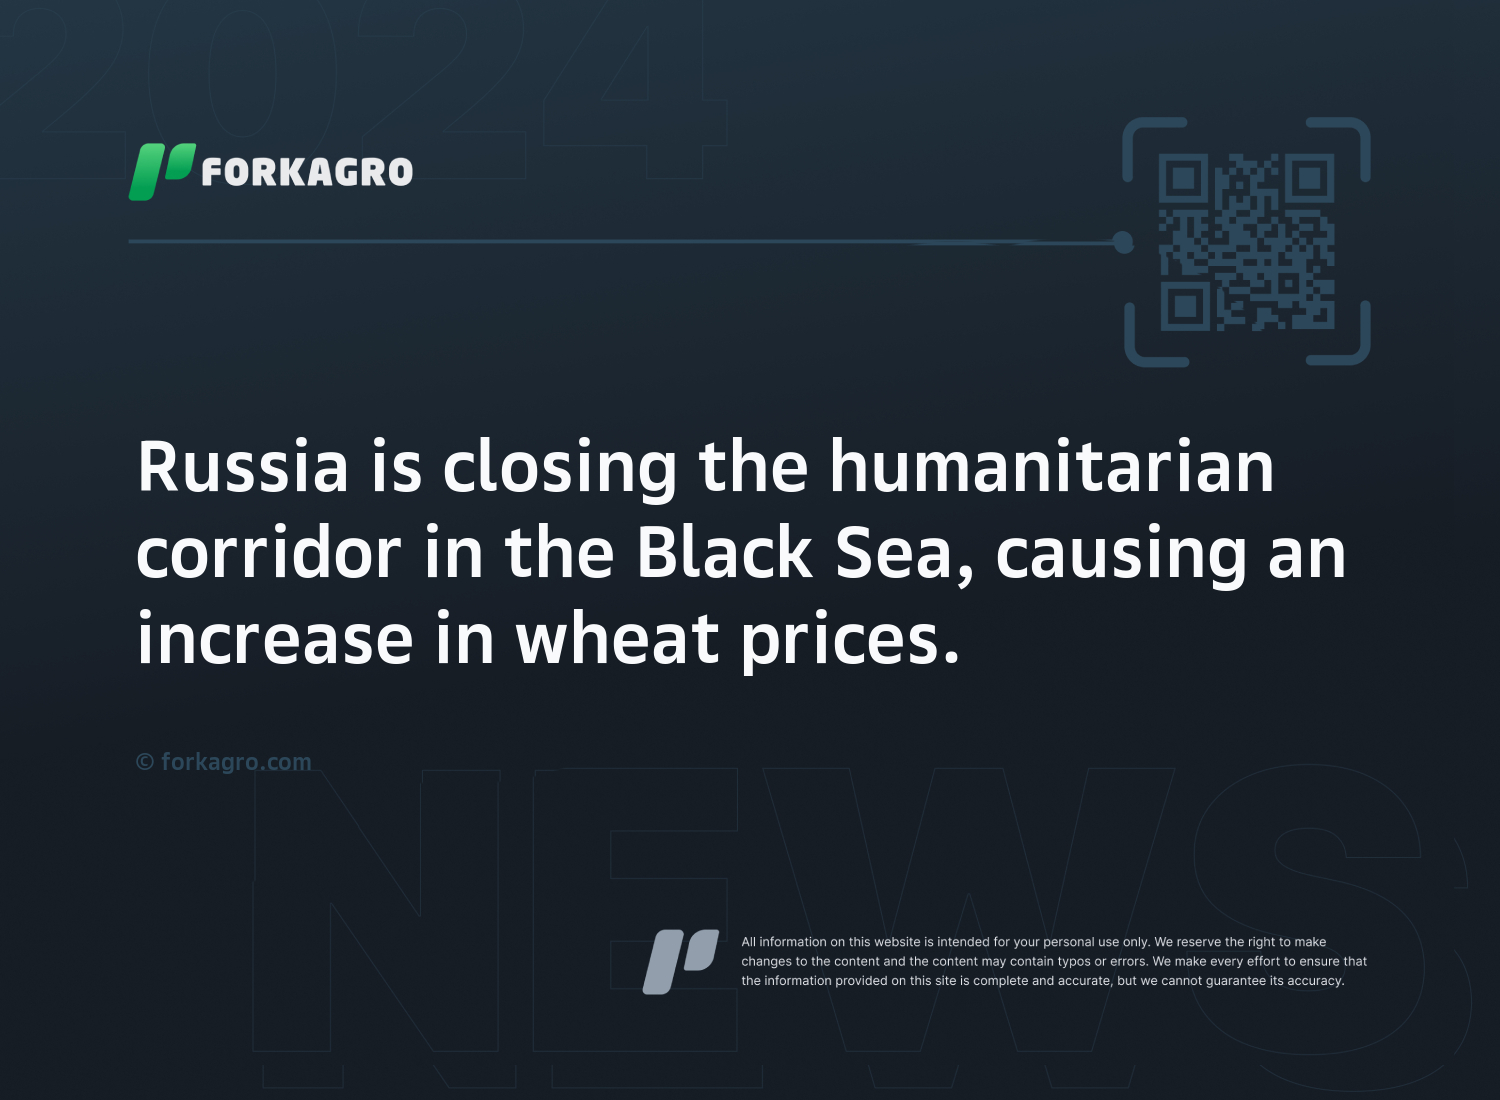 Russia is closing the humanitarian corridor in the Black Sea, causing an increase in wheat prices.